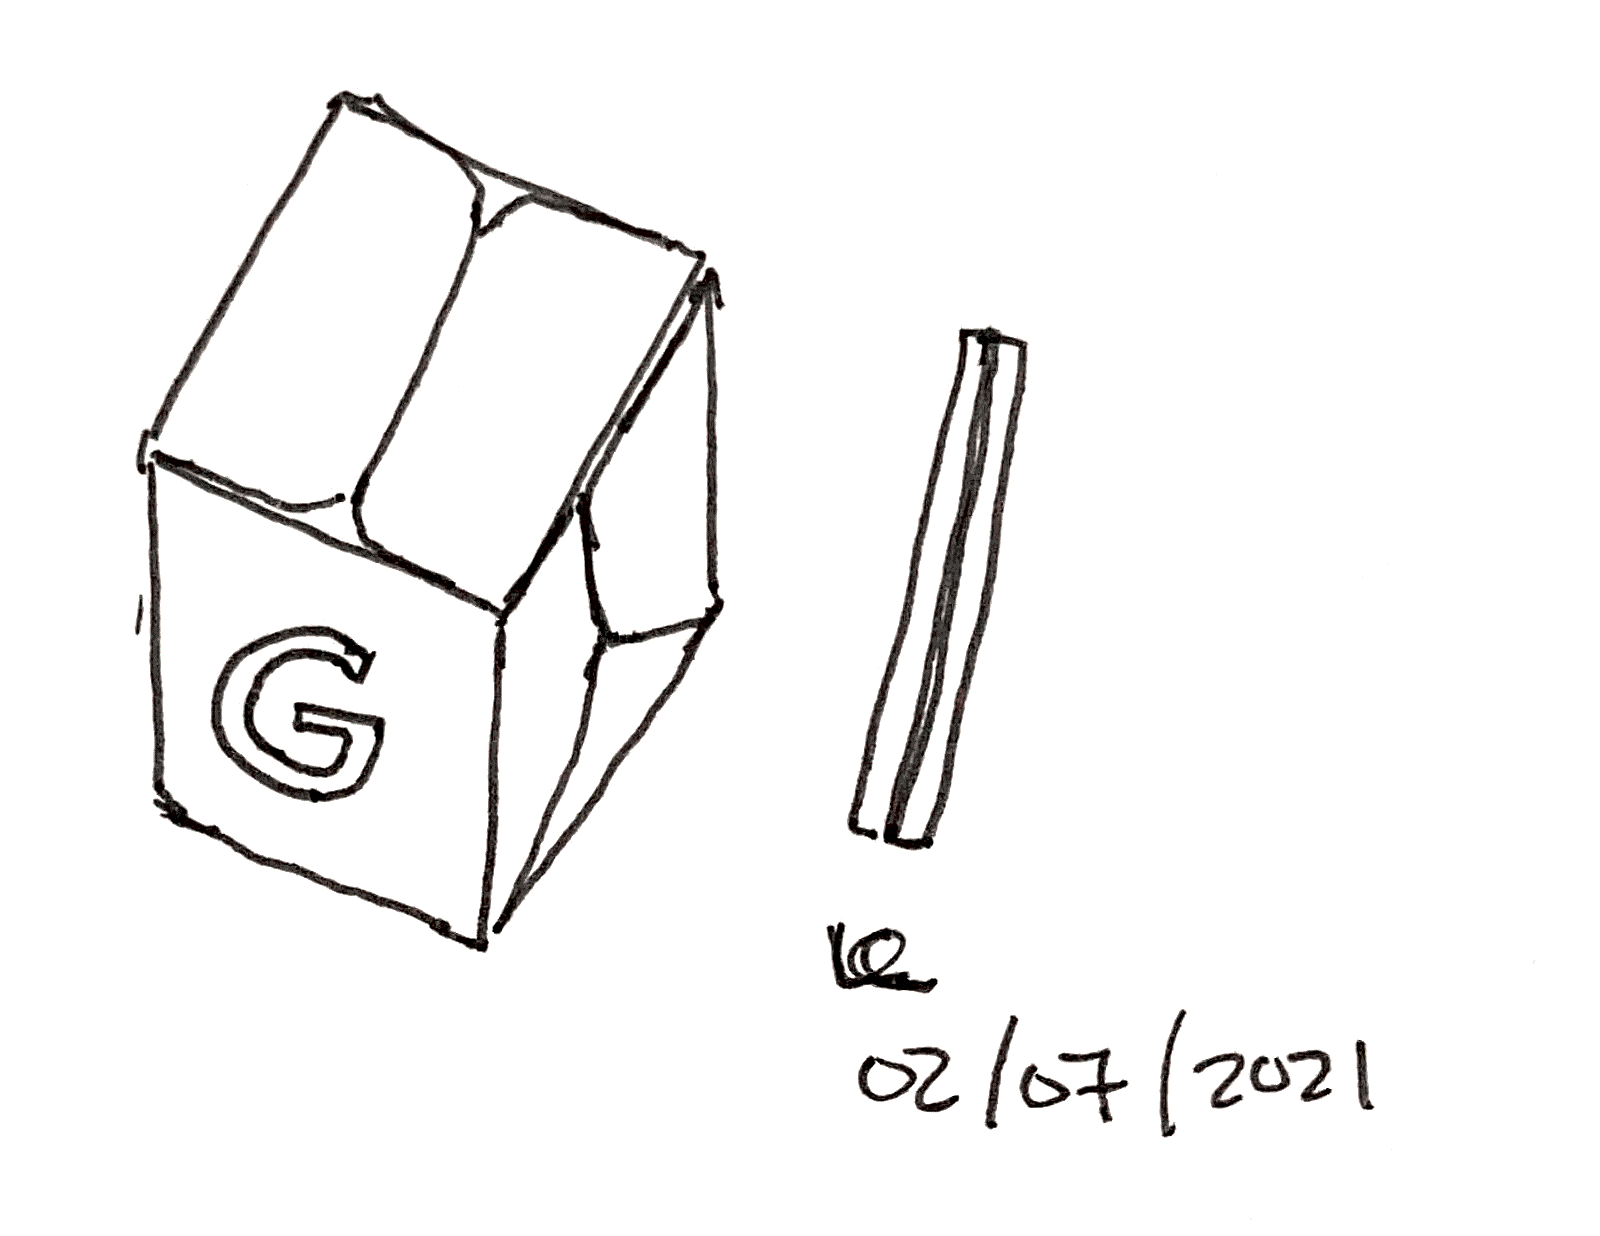 sketch of take out container with Google logo